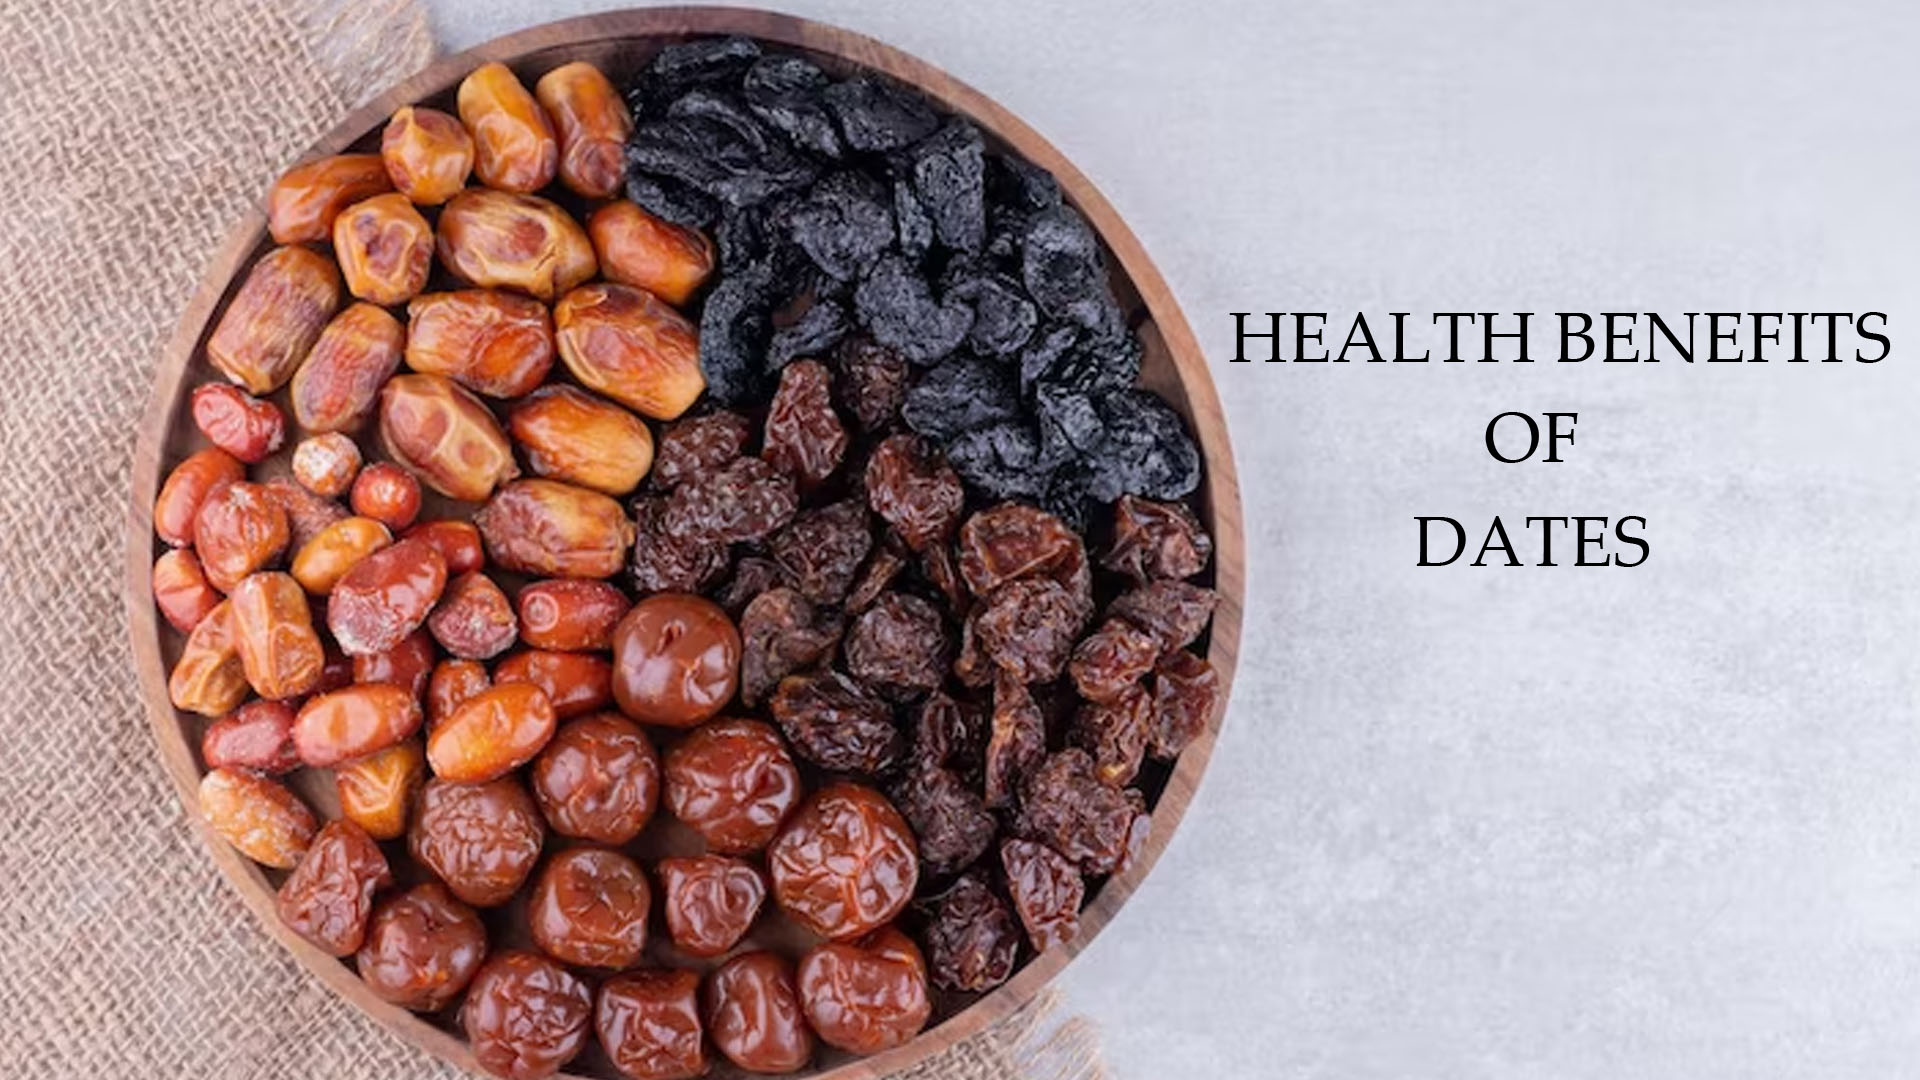 Do Dates Really Have Health Benefits?